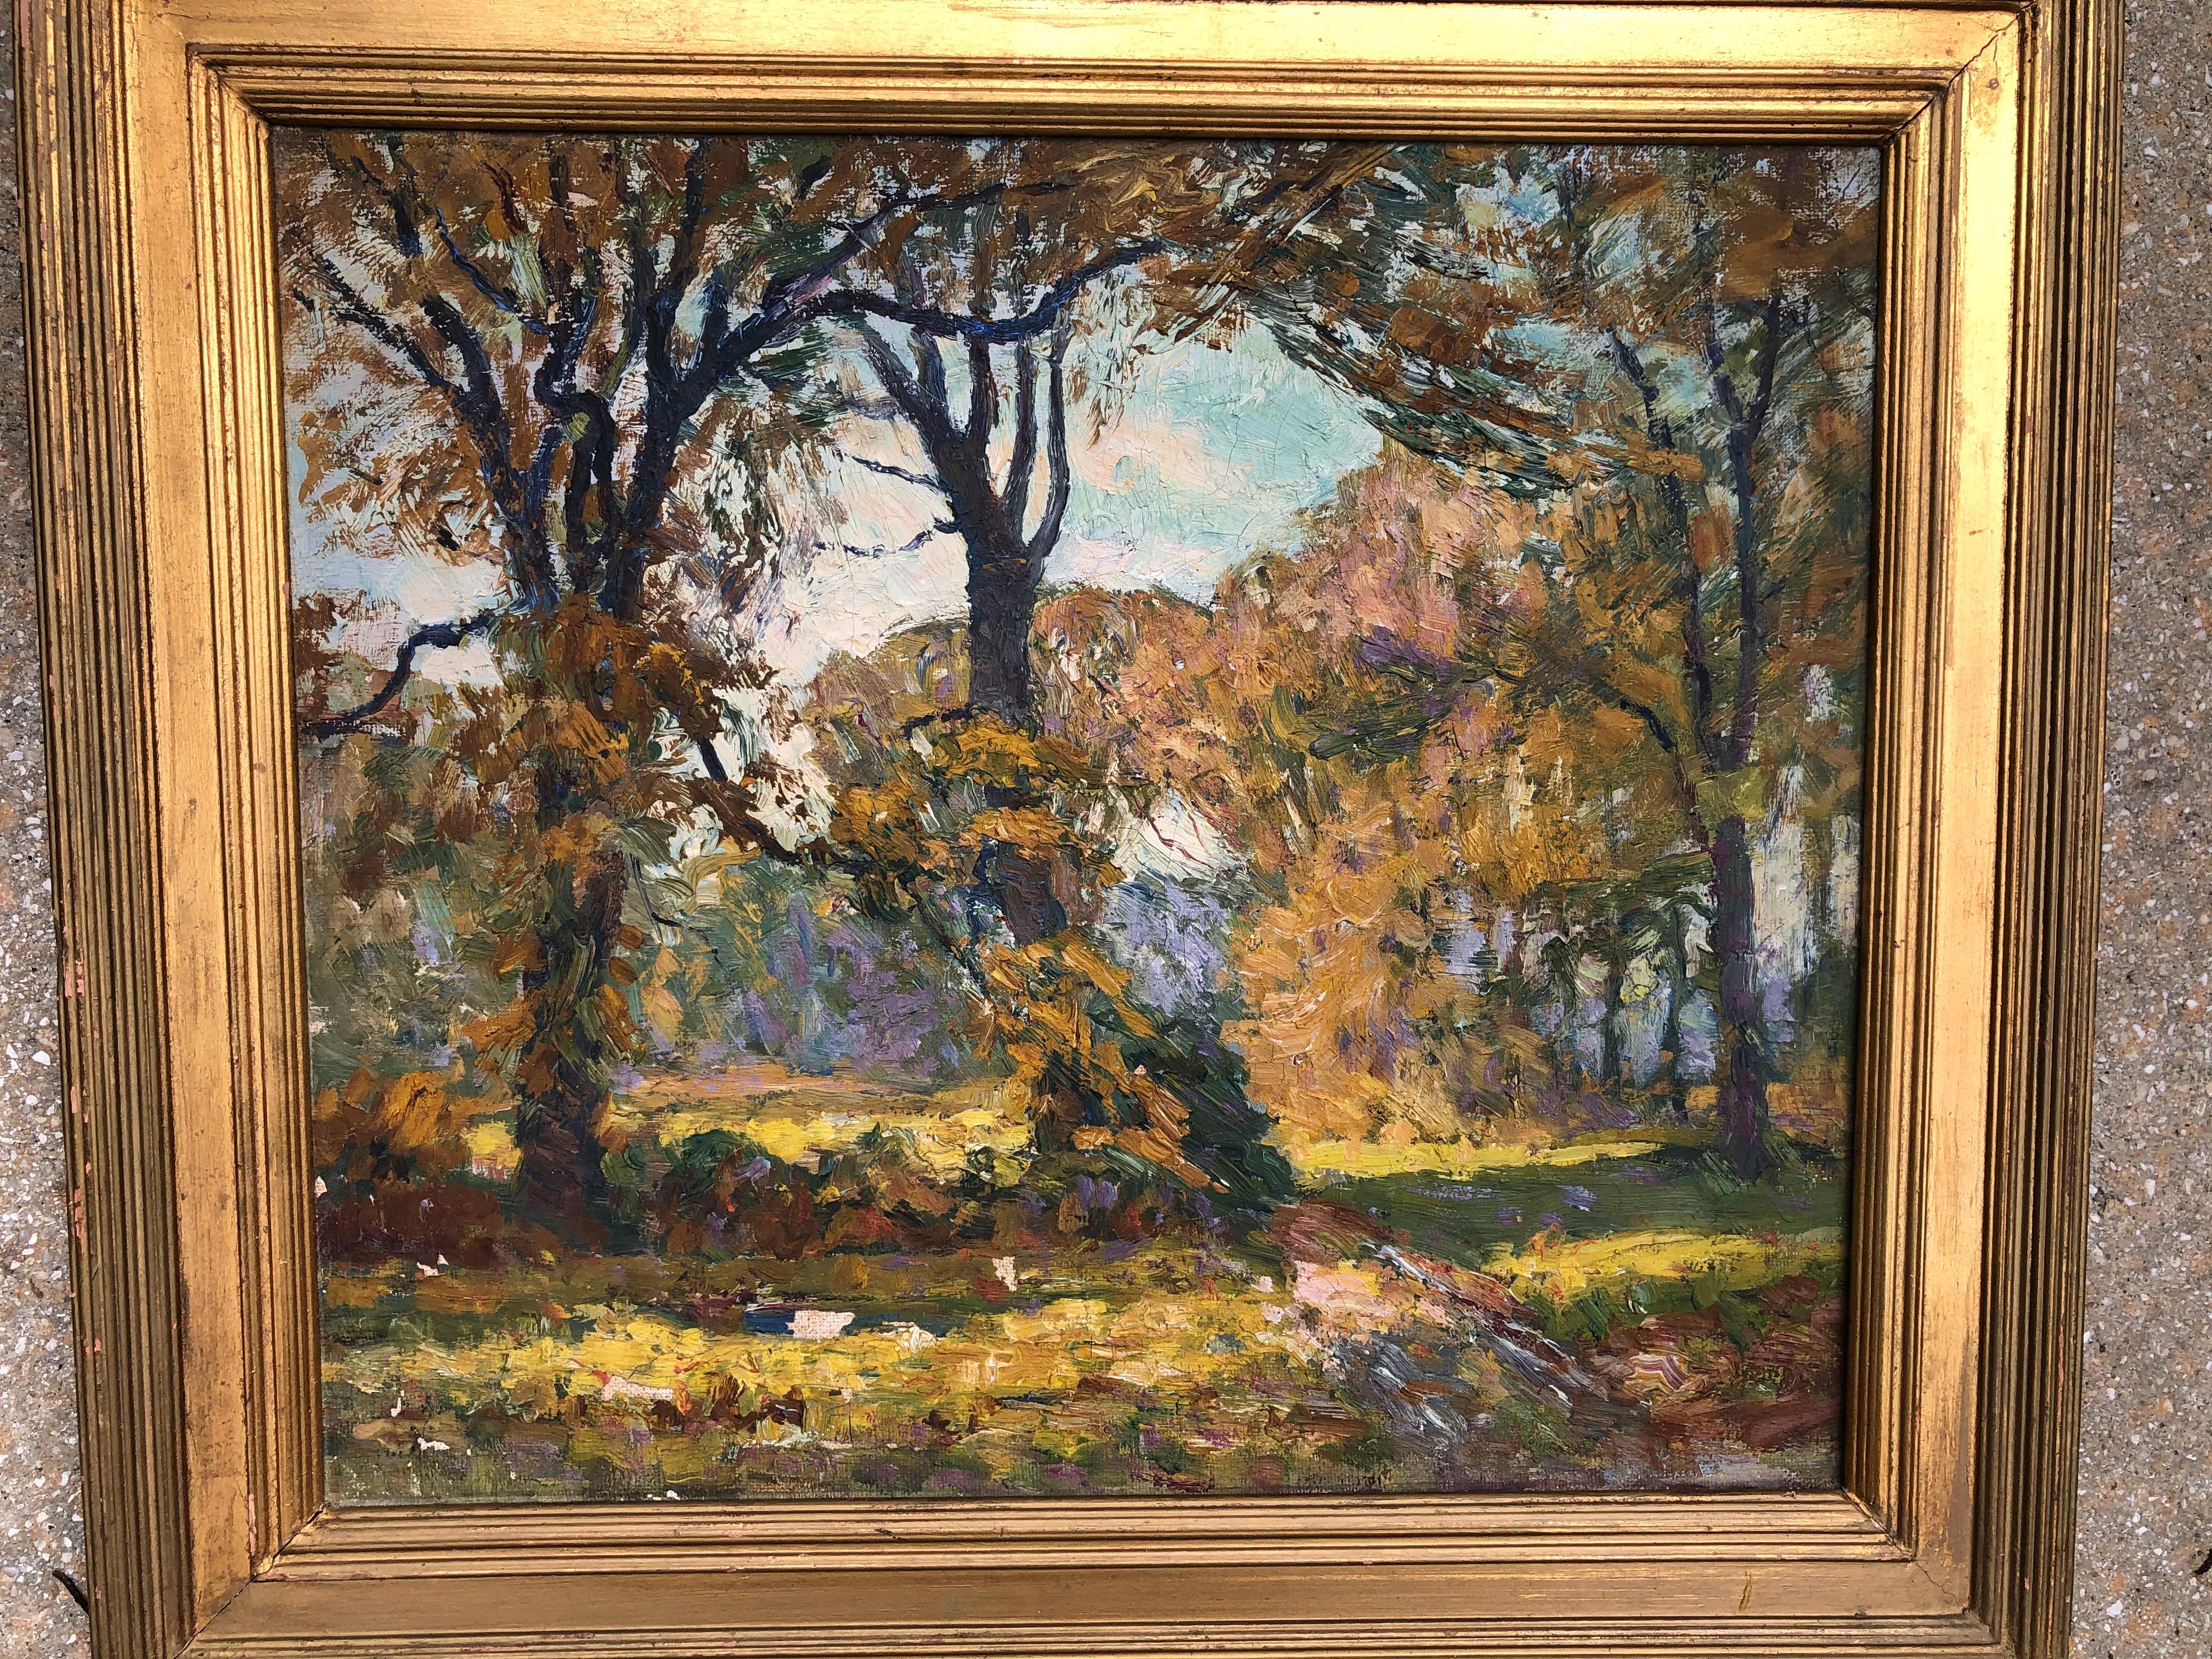 Unknown Landscape Painting - American Impressionist “Old Friends”